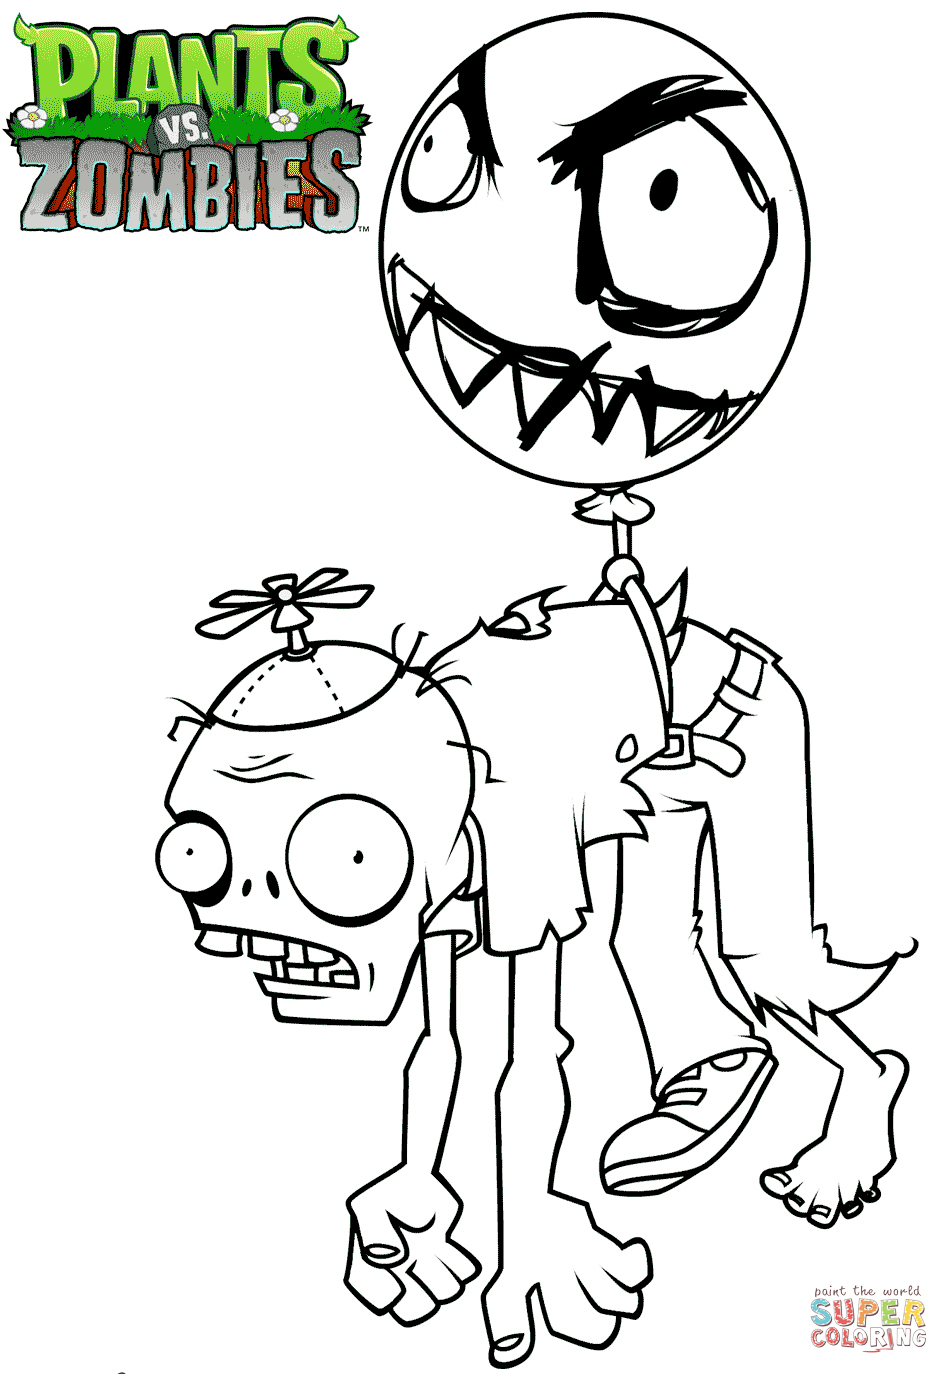 Plants vs. Zombies Balloon Zombie coloring page | Free Printable ...